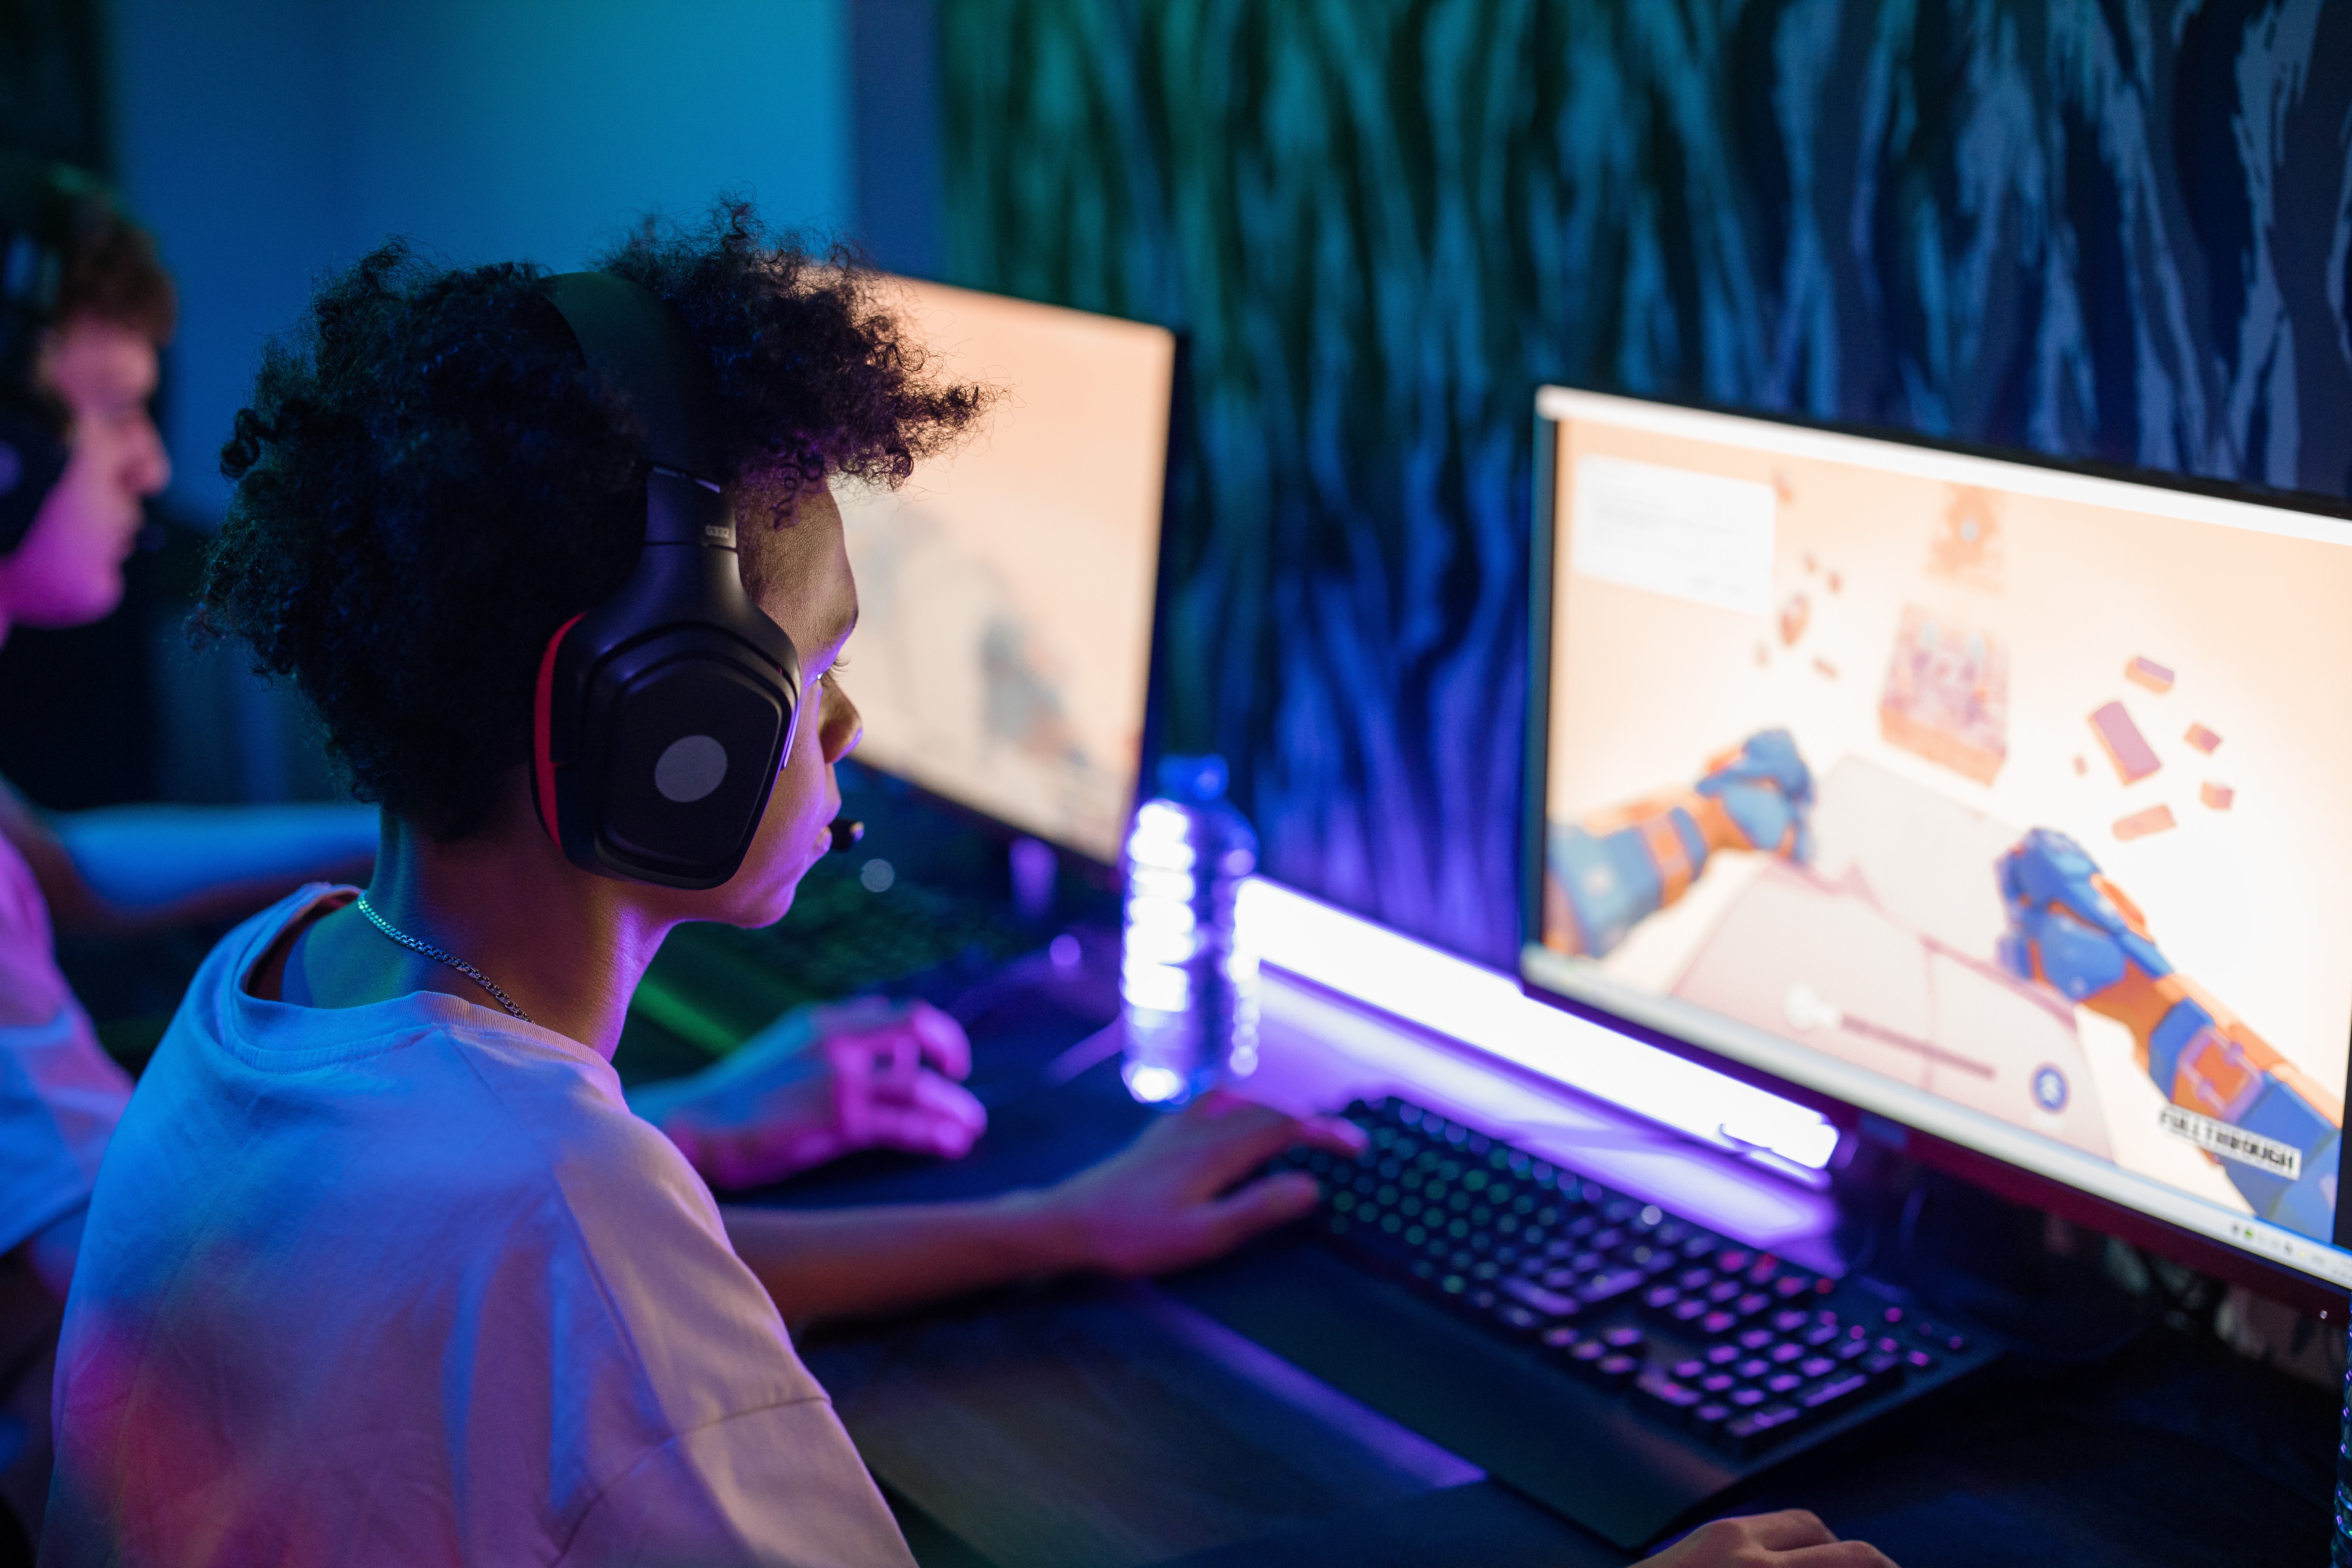 Teens at computer with headphones on playing a video game.